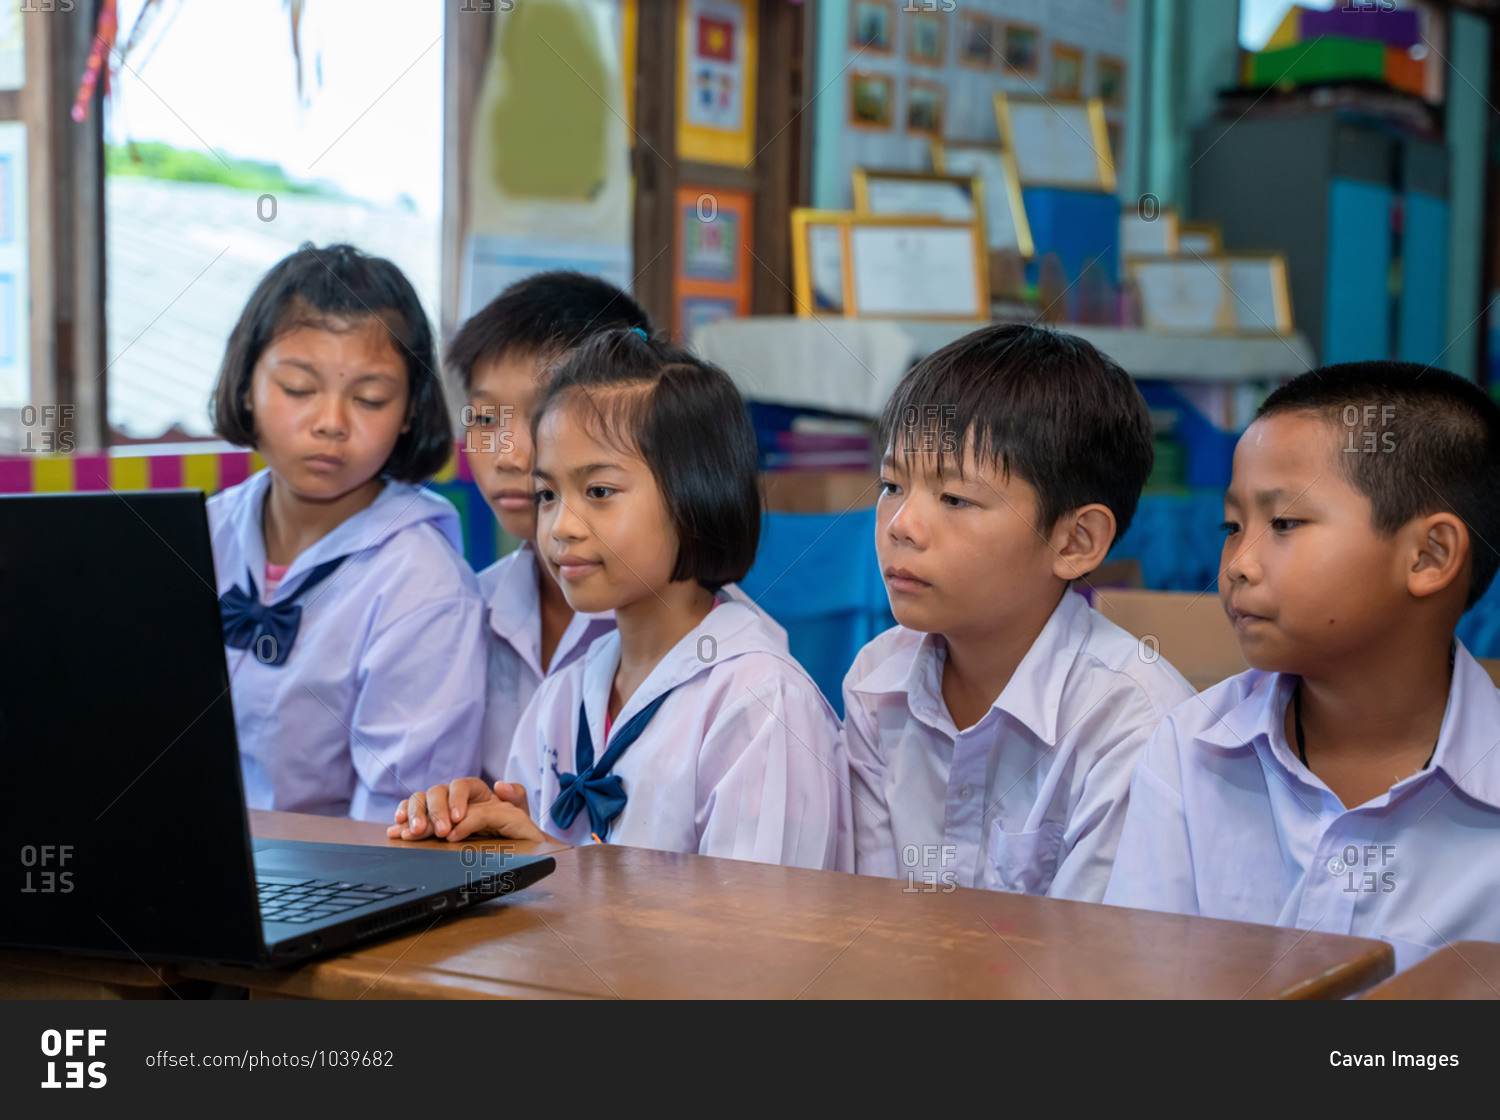 Elementary school students looking at computer in classroom